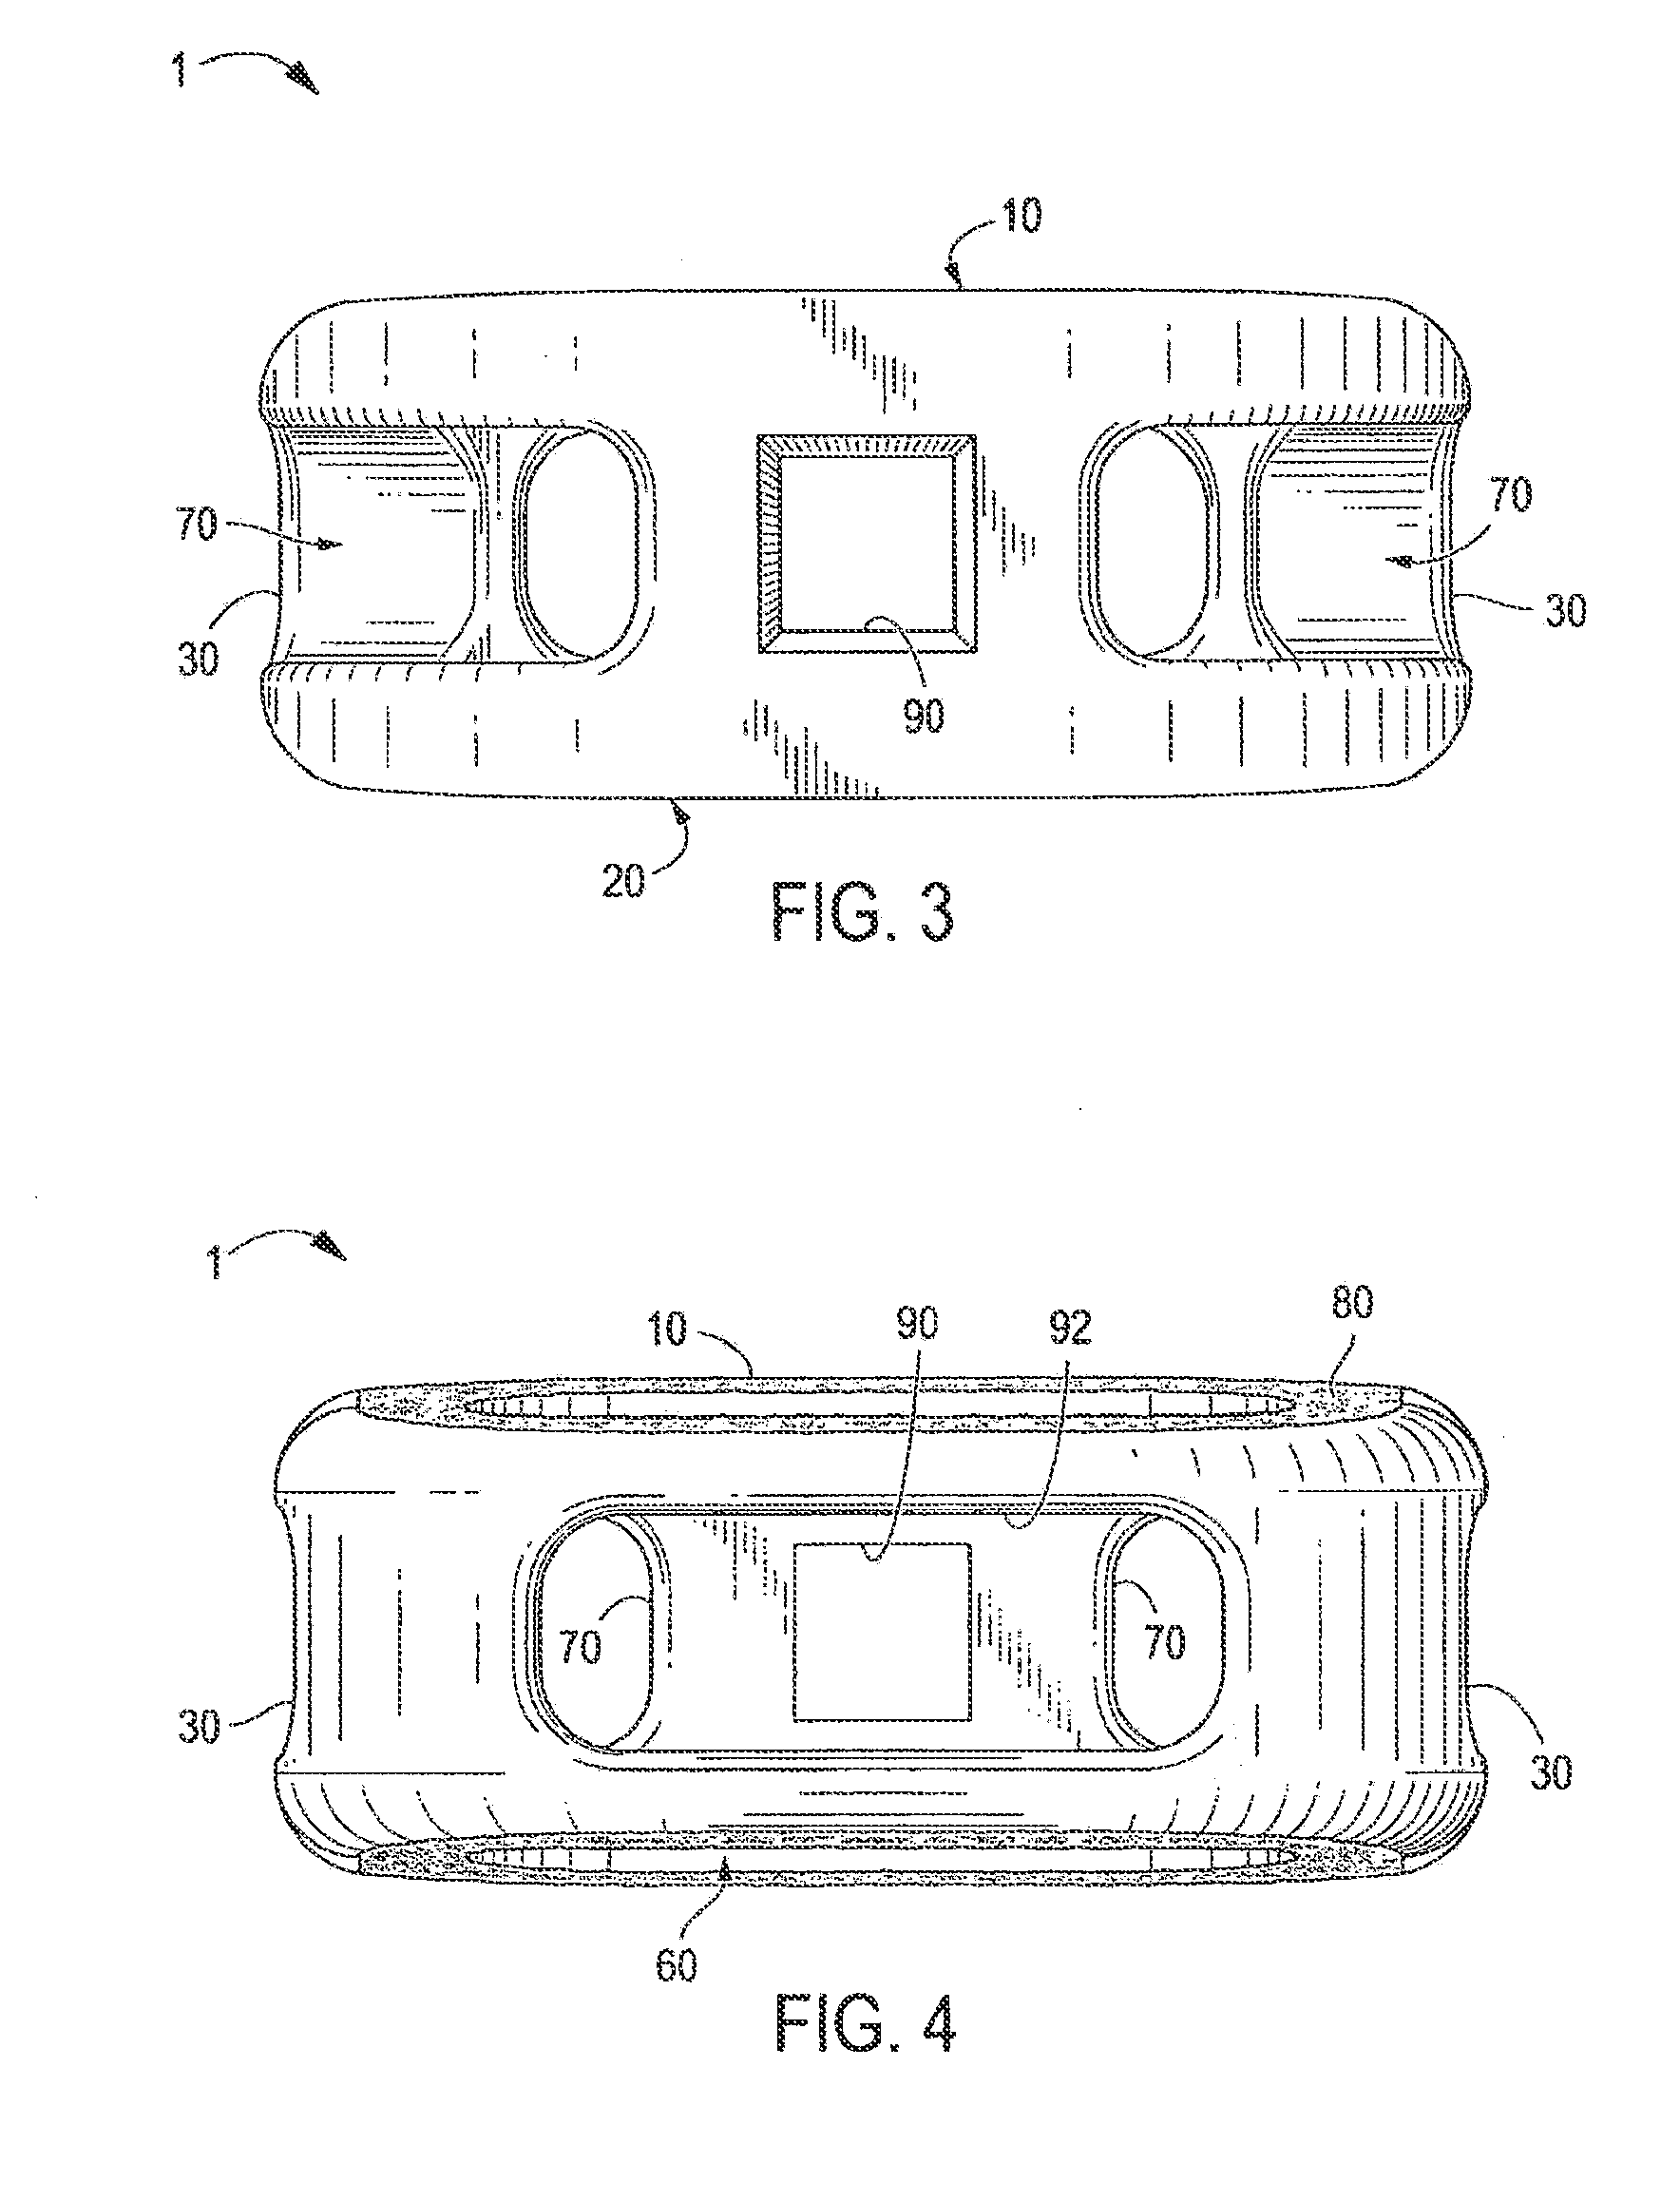 Implant with critical ratio of load bearing surface area to central opening area